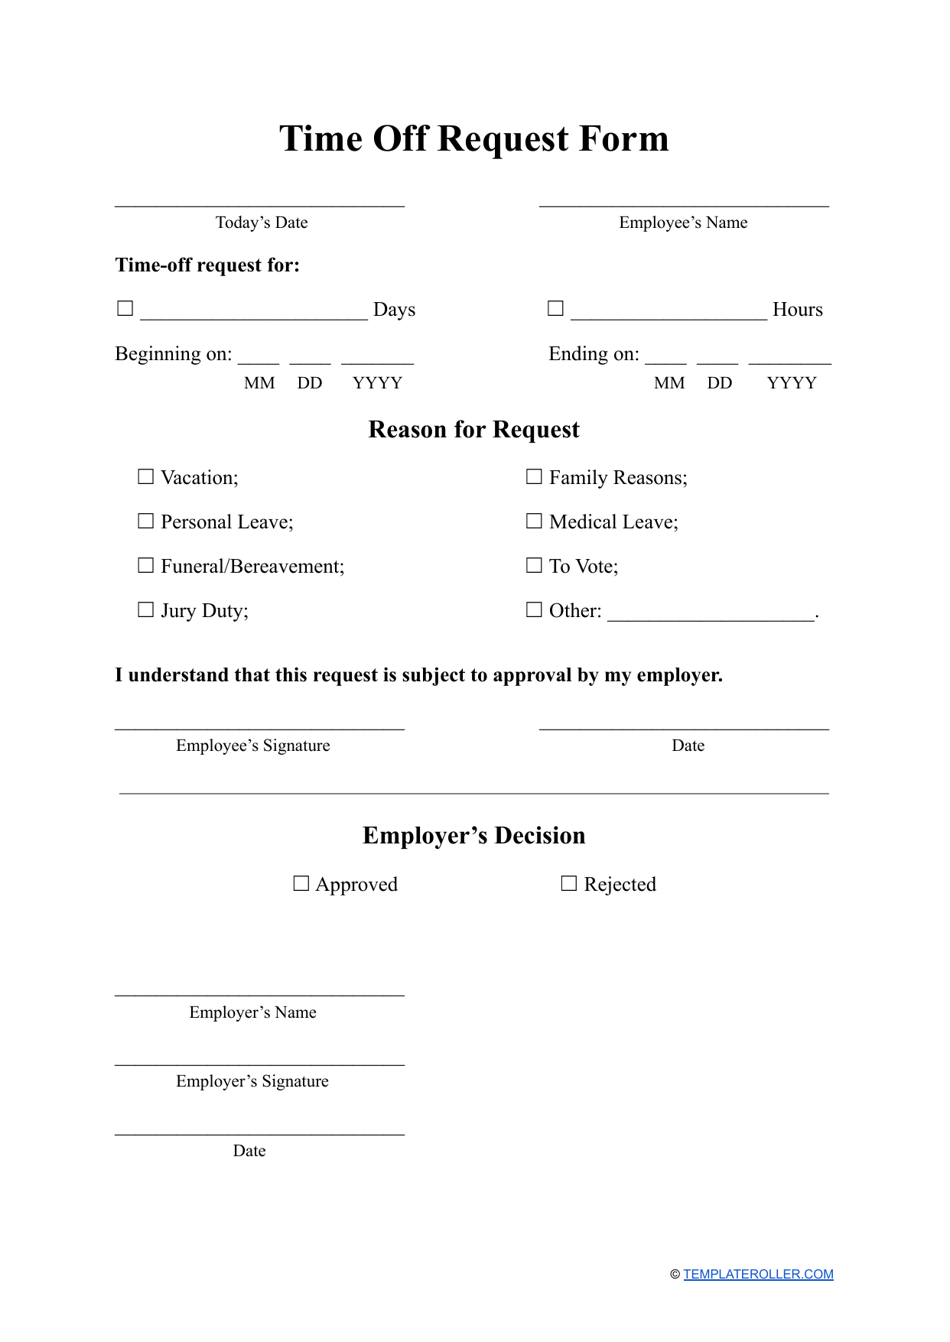 printable-time-off-request-form-printable-form-templates-and-letter